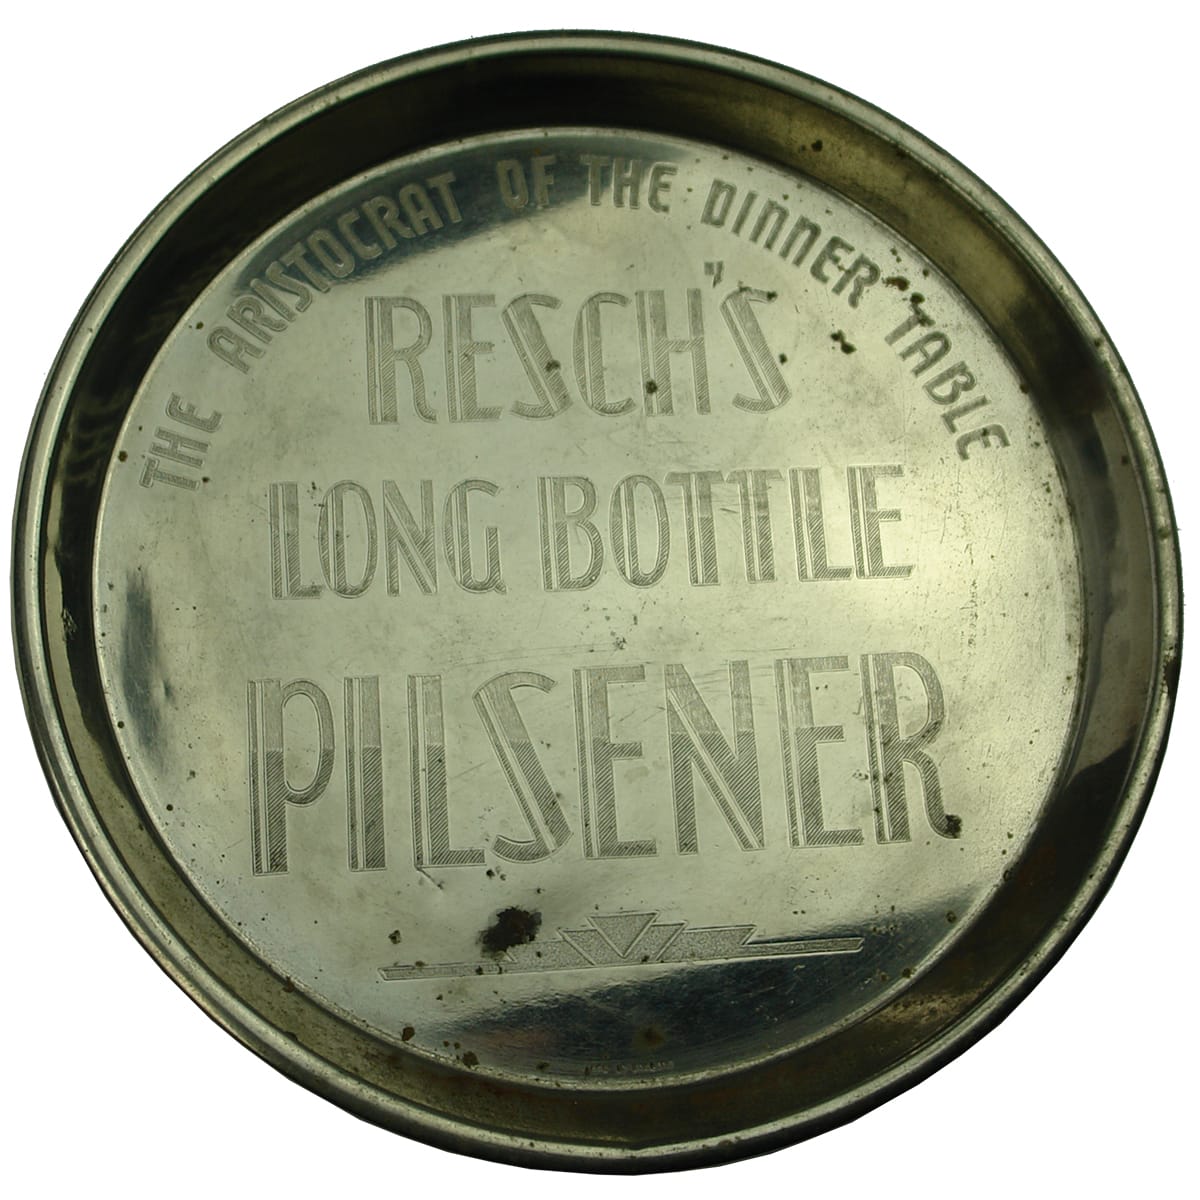 Serving Tray. Resch's Long Bottle Pilsener. Electro-plated. (Sydney, New South Wales)